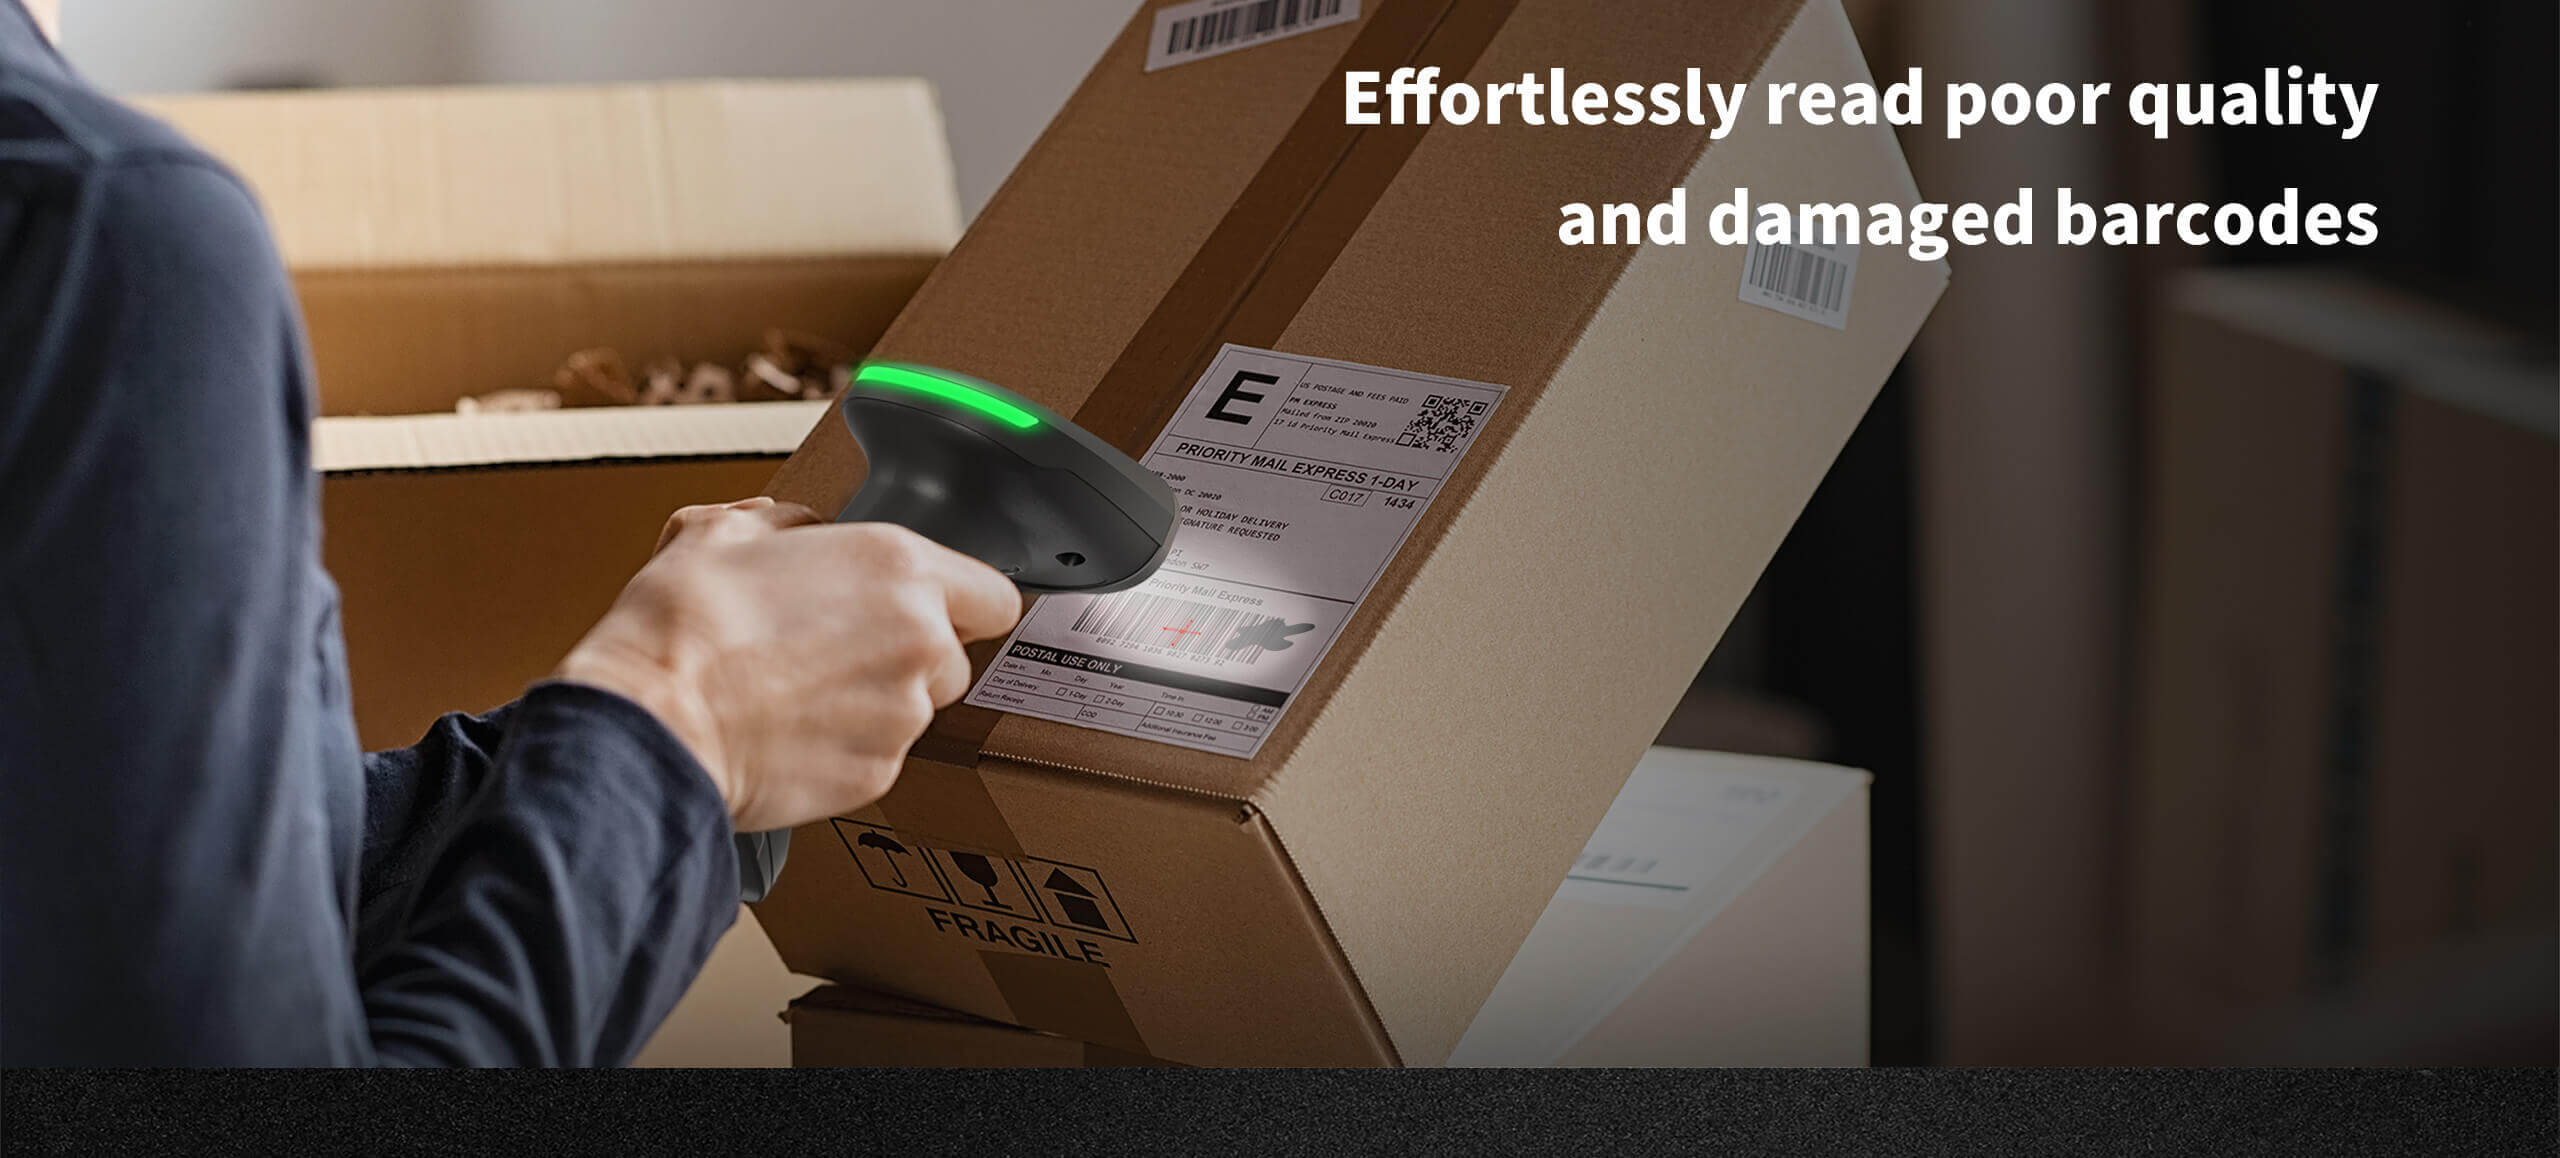 barcode scanner reads poor quality and damaged barcodes